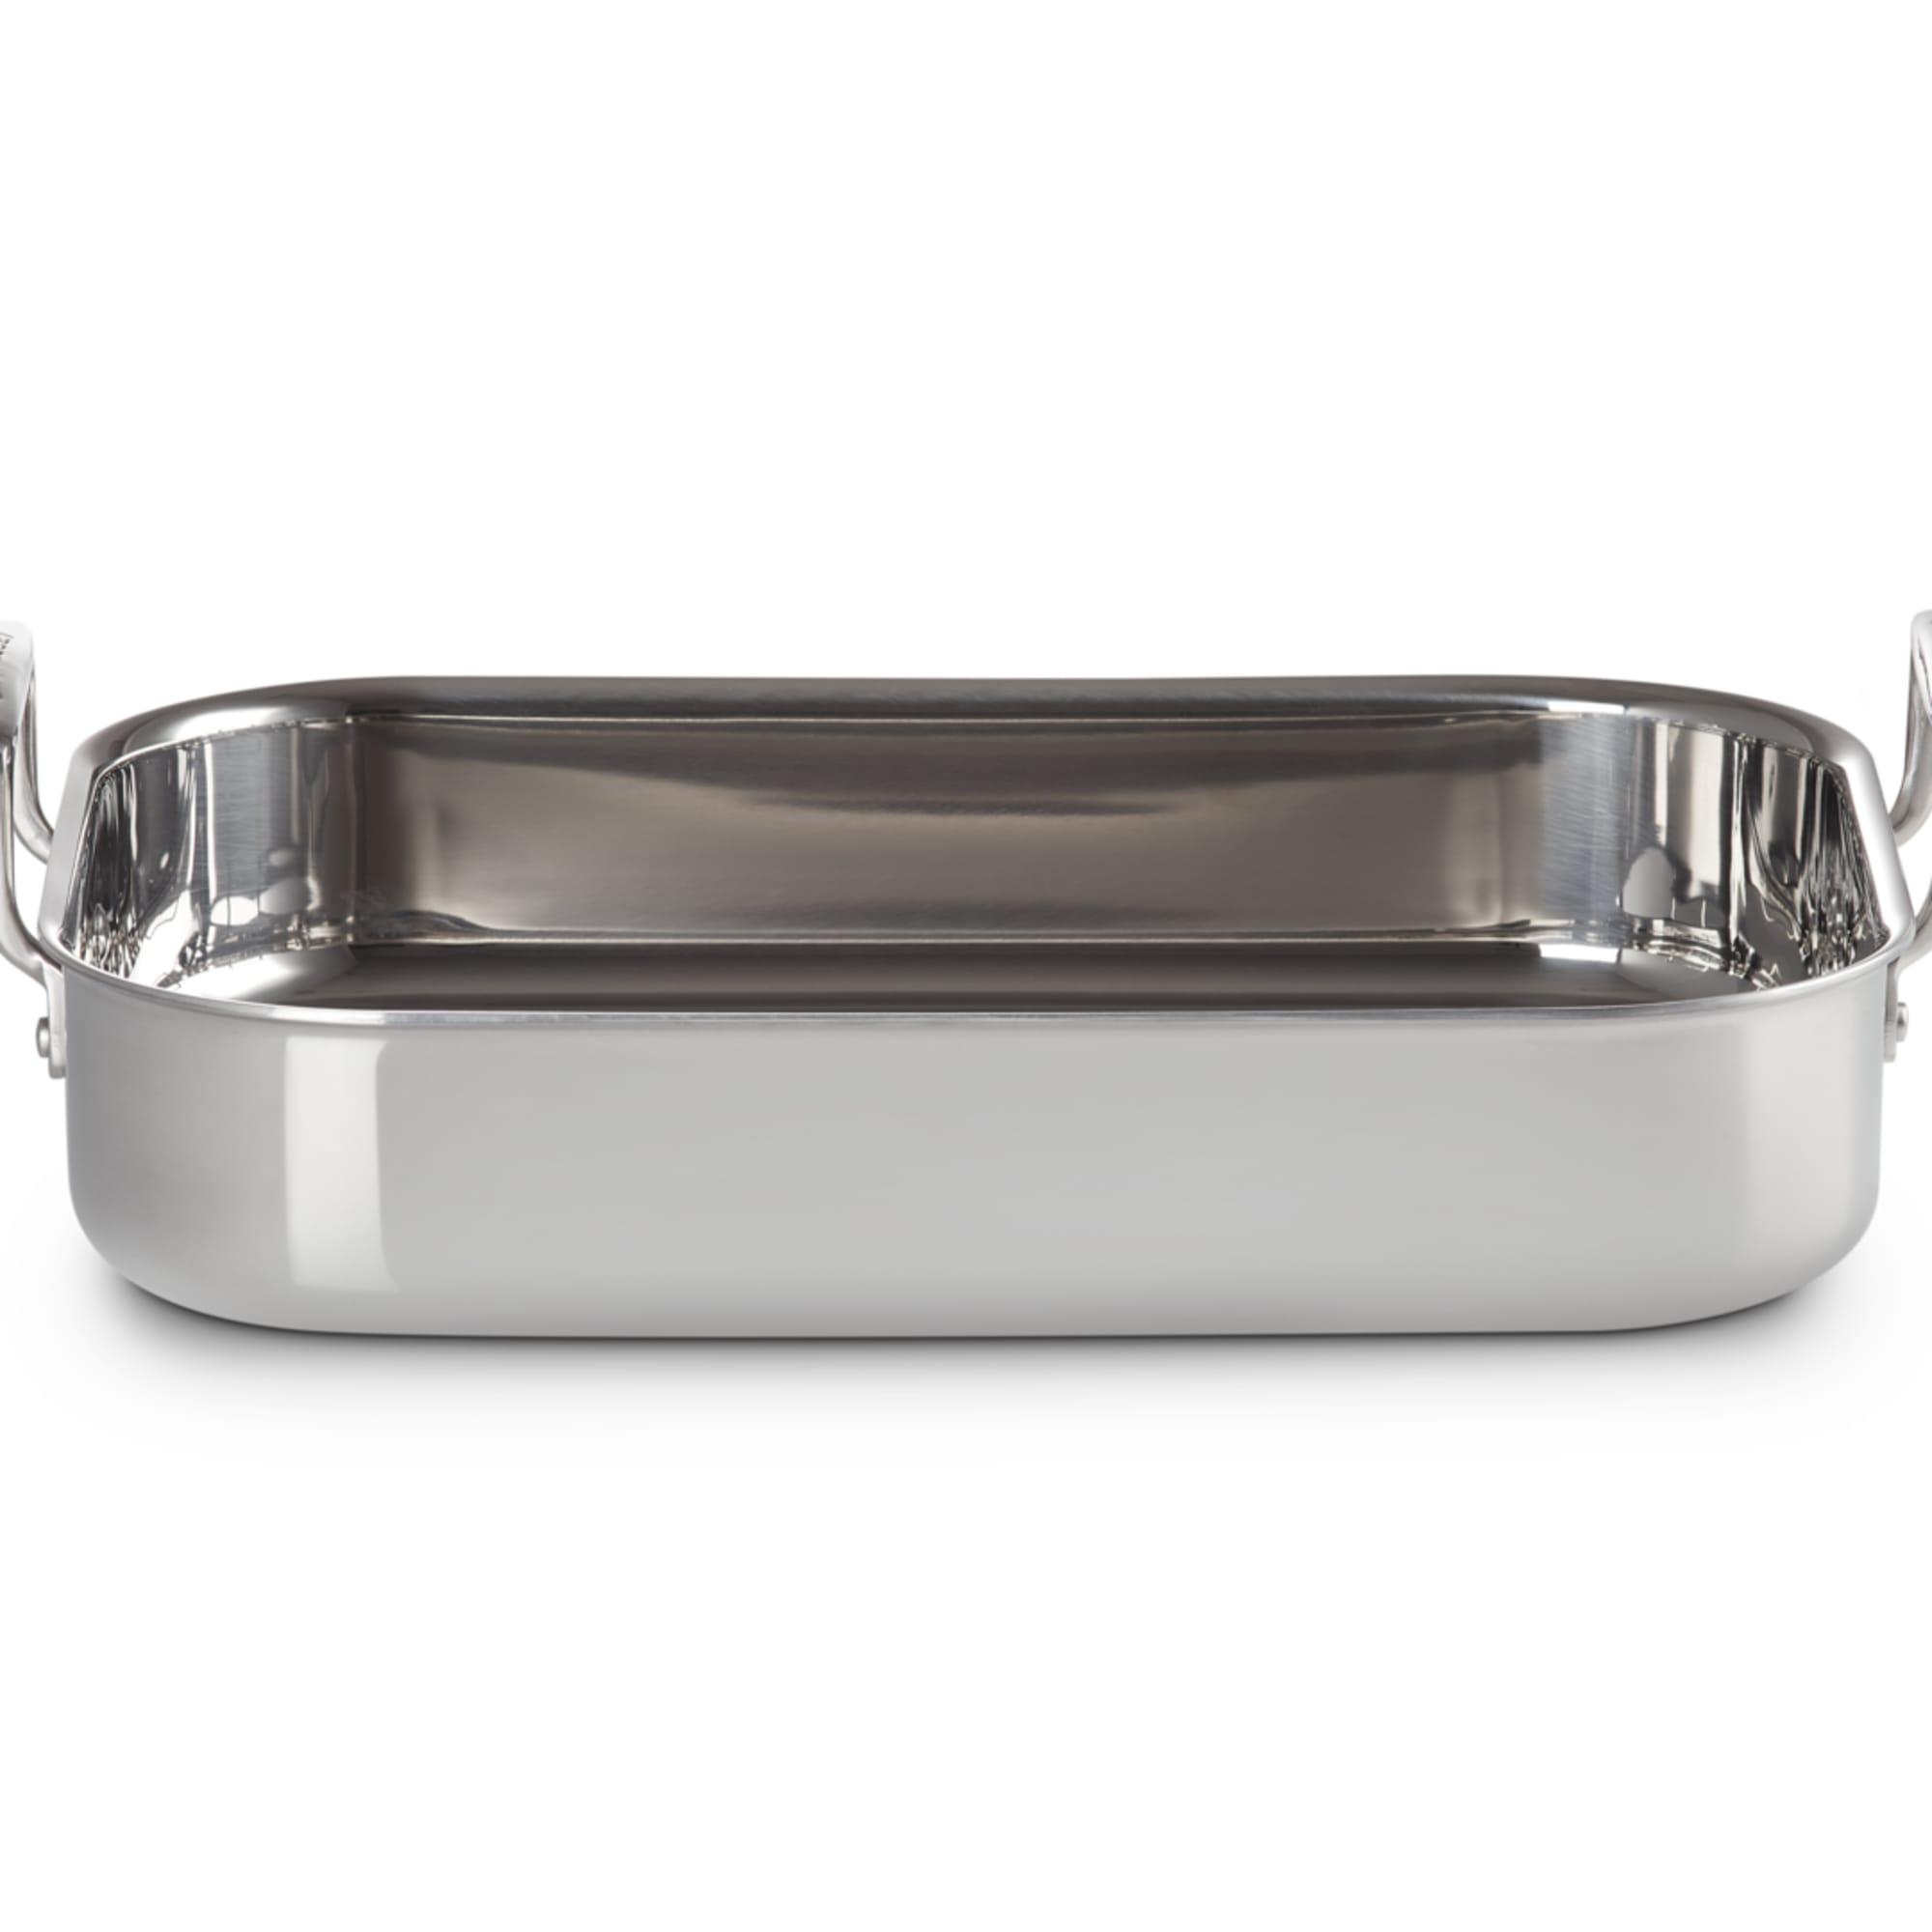 Le Creuset 3-Ply Stainless Steel Rectangular Roaster 35x25cm Image 3